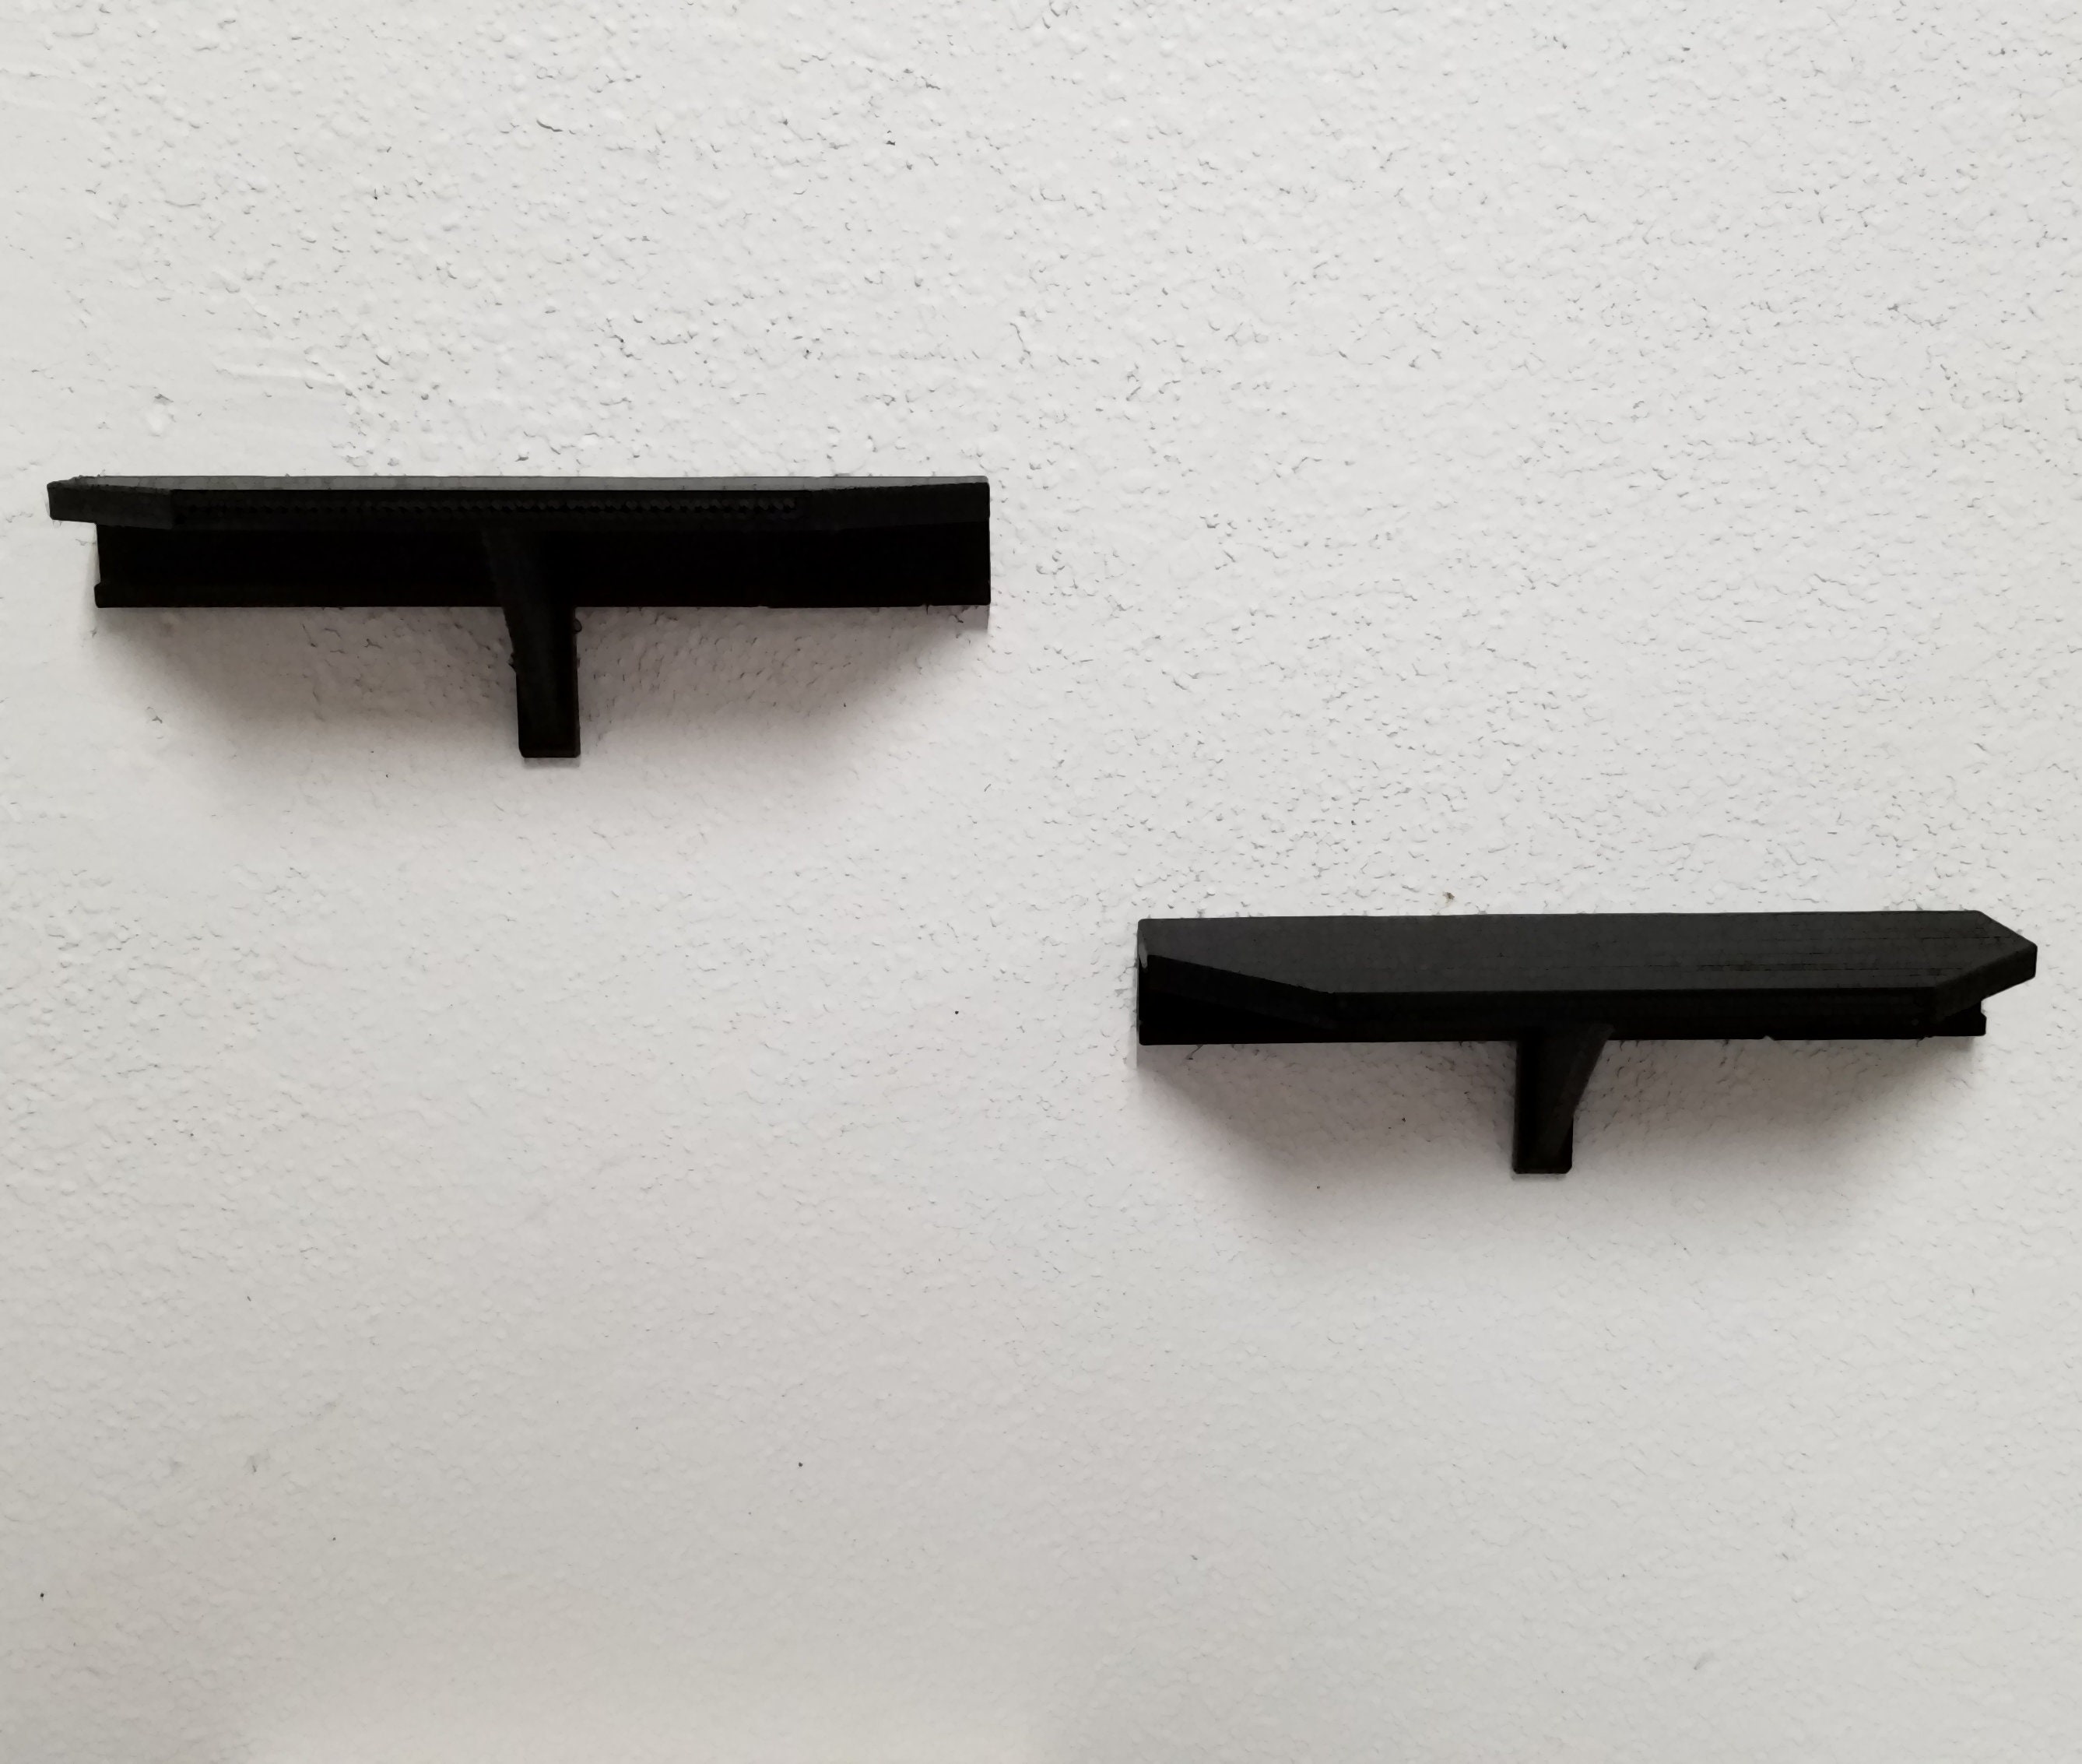 Floating Shelf No Drill Adhesive Wall Shelf Set of 2, Floating Shelves Damage-Free Expand Wall Space for Living Room, Bathroom, Gaming Room, Office 